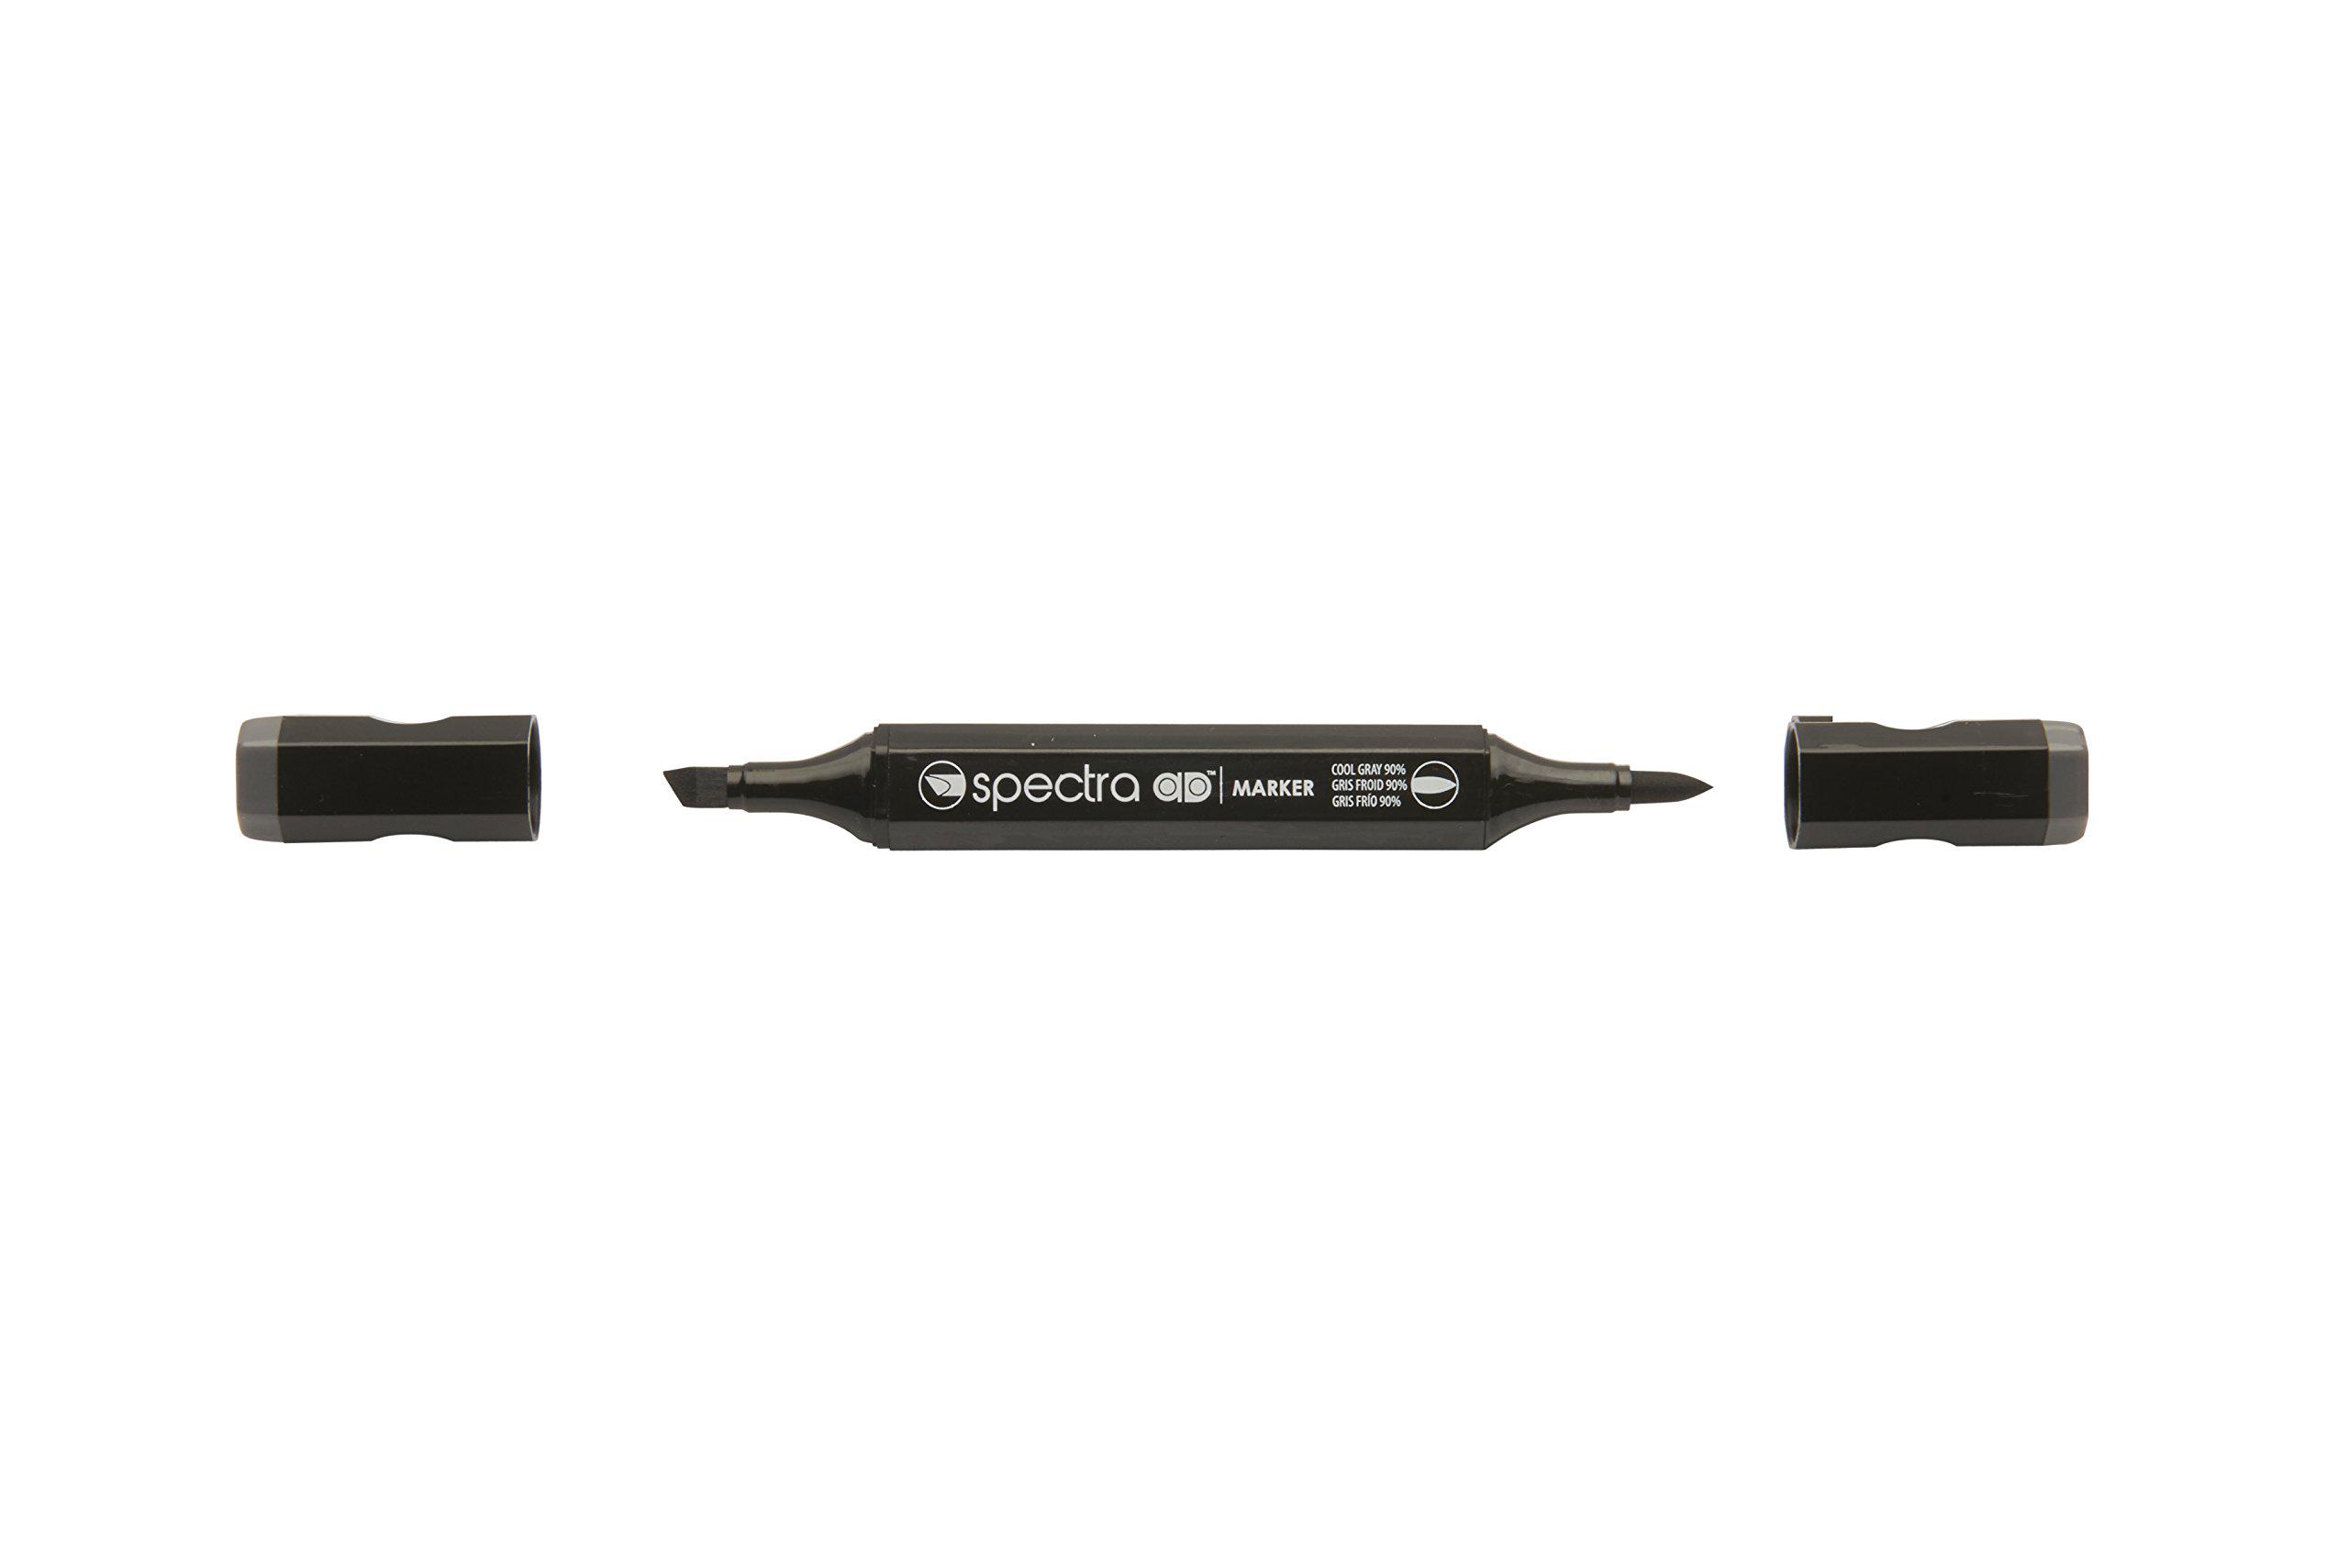 ad marker chartpak spectra, tri-nib and brush dual-tip, cool gray 90%, 1 each (s031ad)